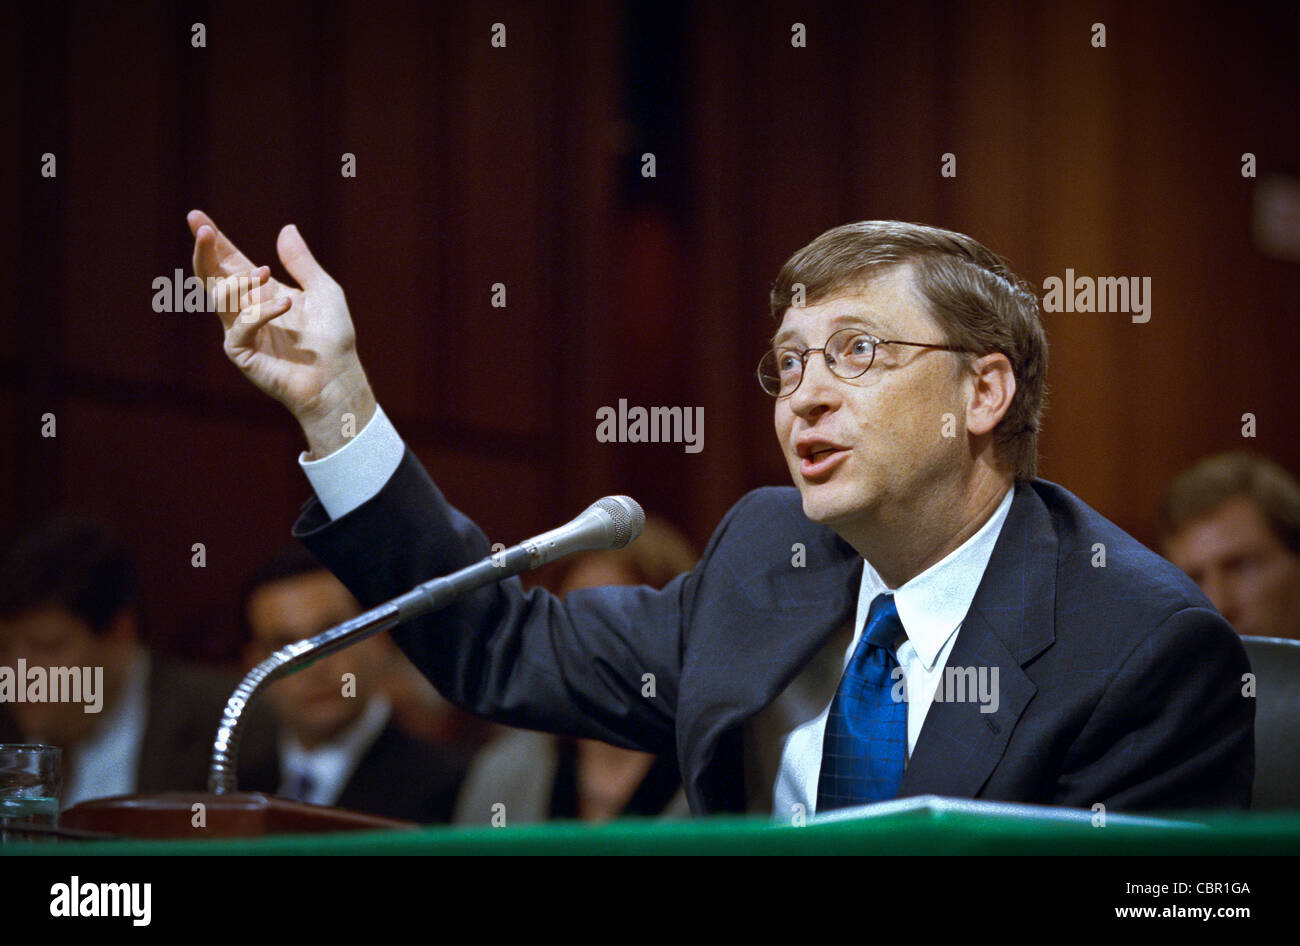 Microsoft founder and CEO, Bill Gates during the second day of the Joint Economic Committee National Summit on High Technology meeting June 15, 1999 in Washington, DC. The committee is discussing the effects of technology on the economy. Stock Photo